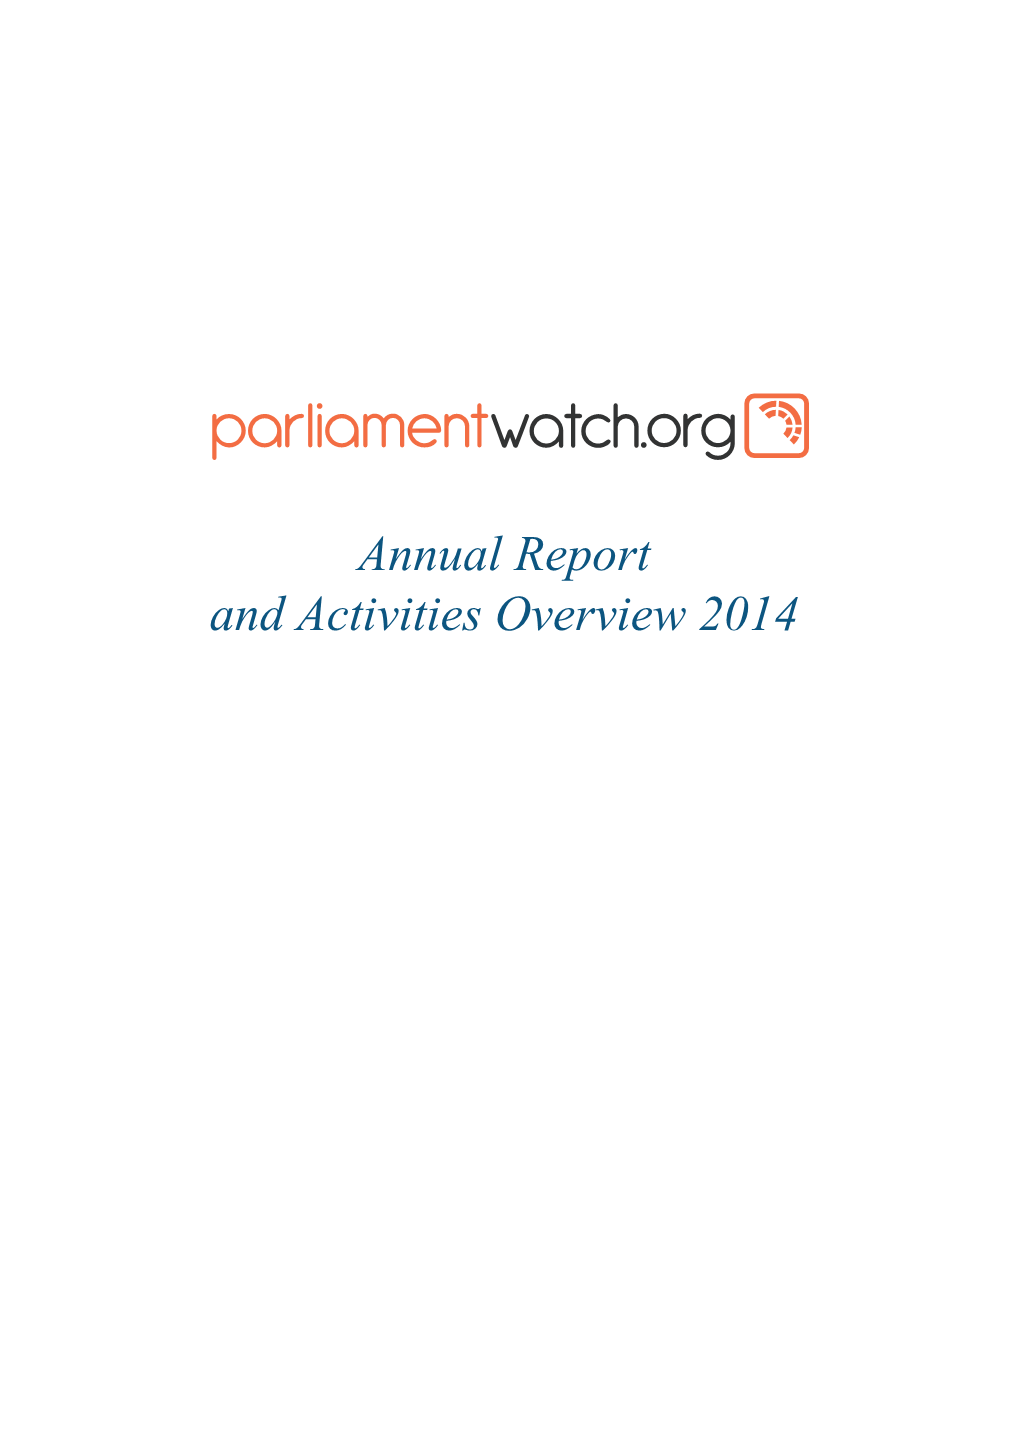 Annual Report and Activities Overview 2014 2